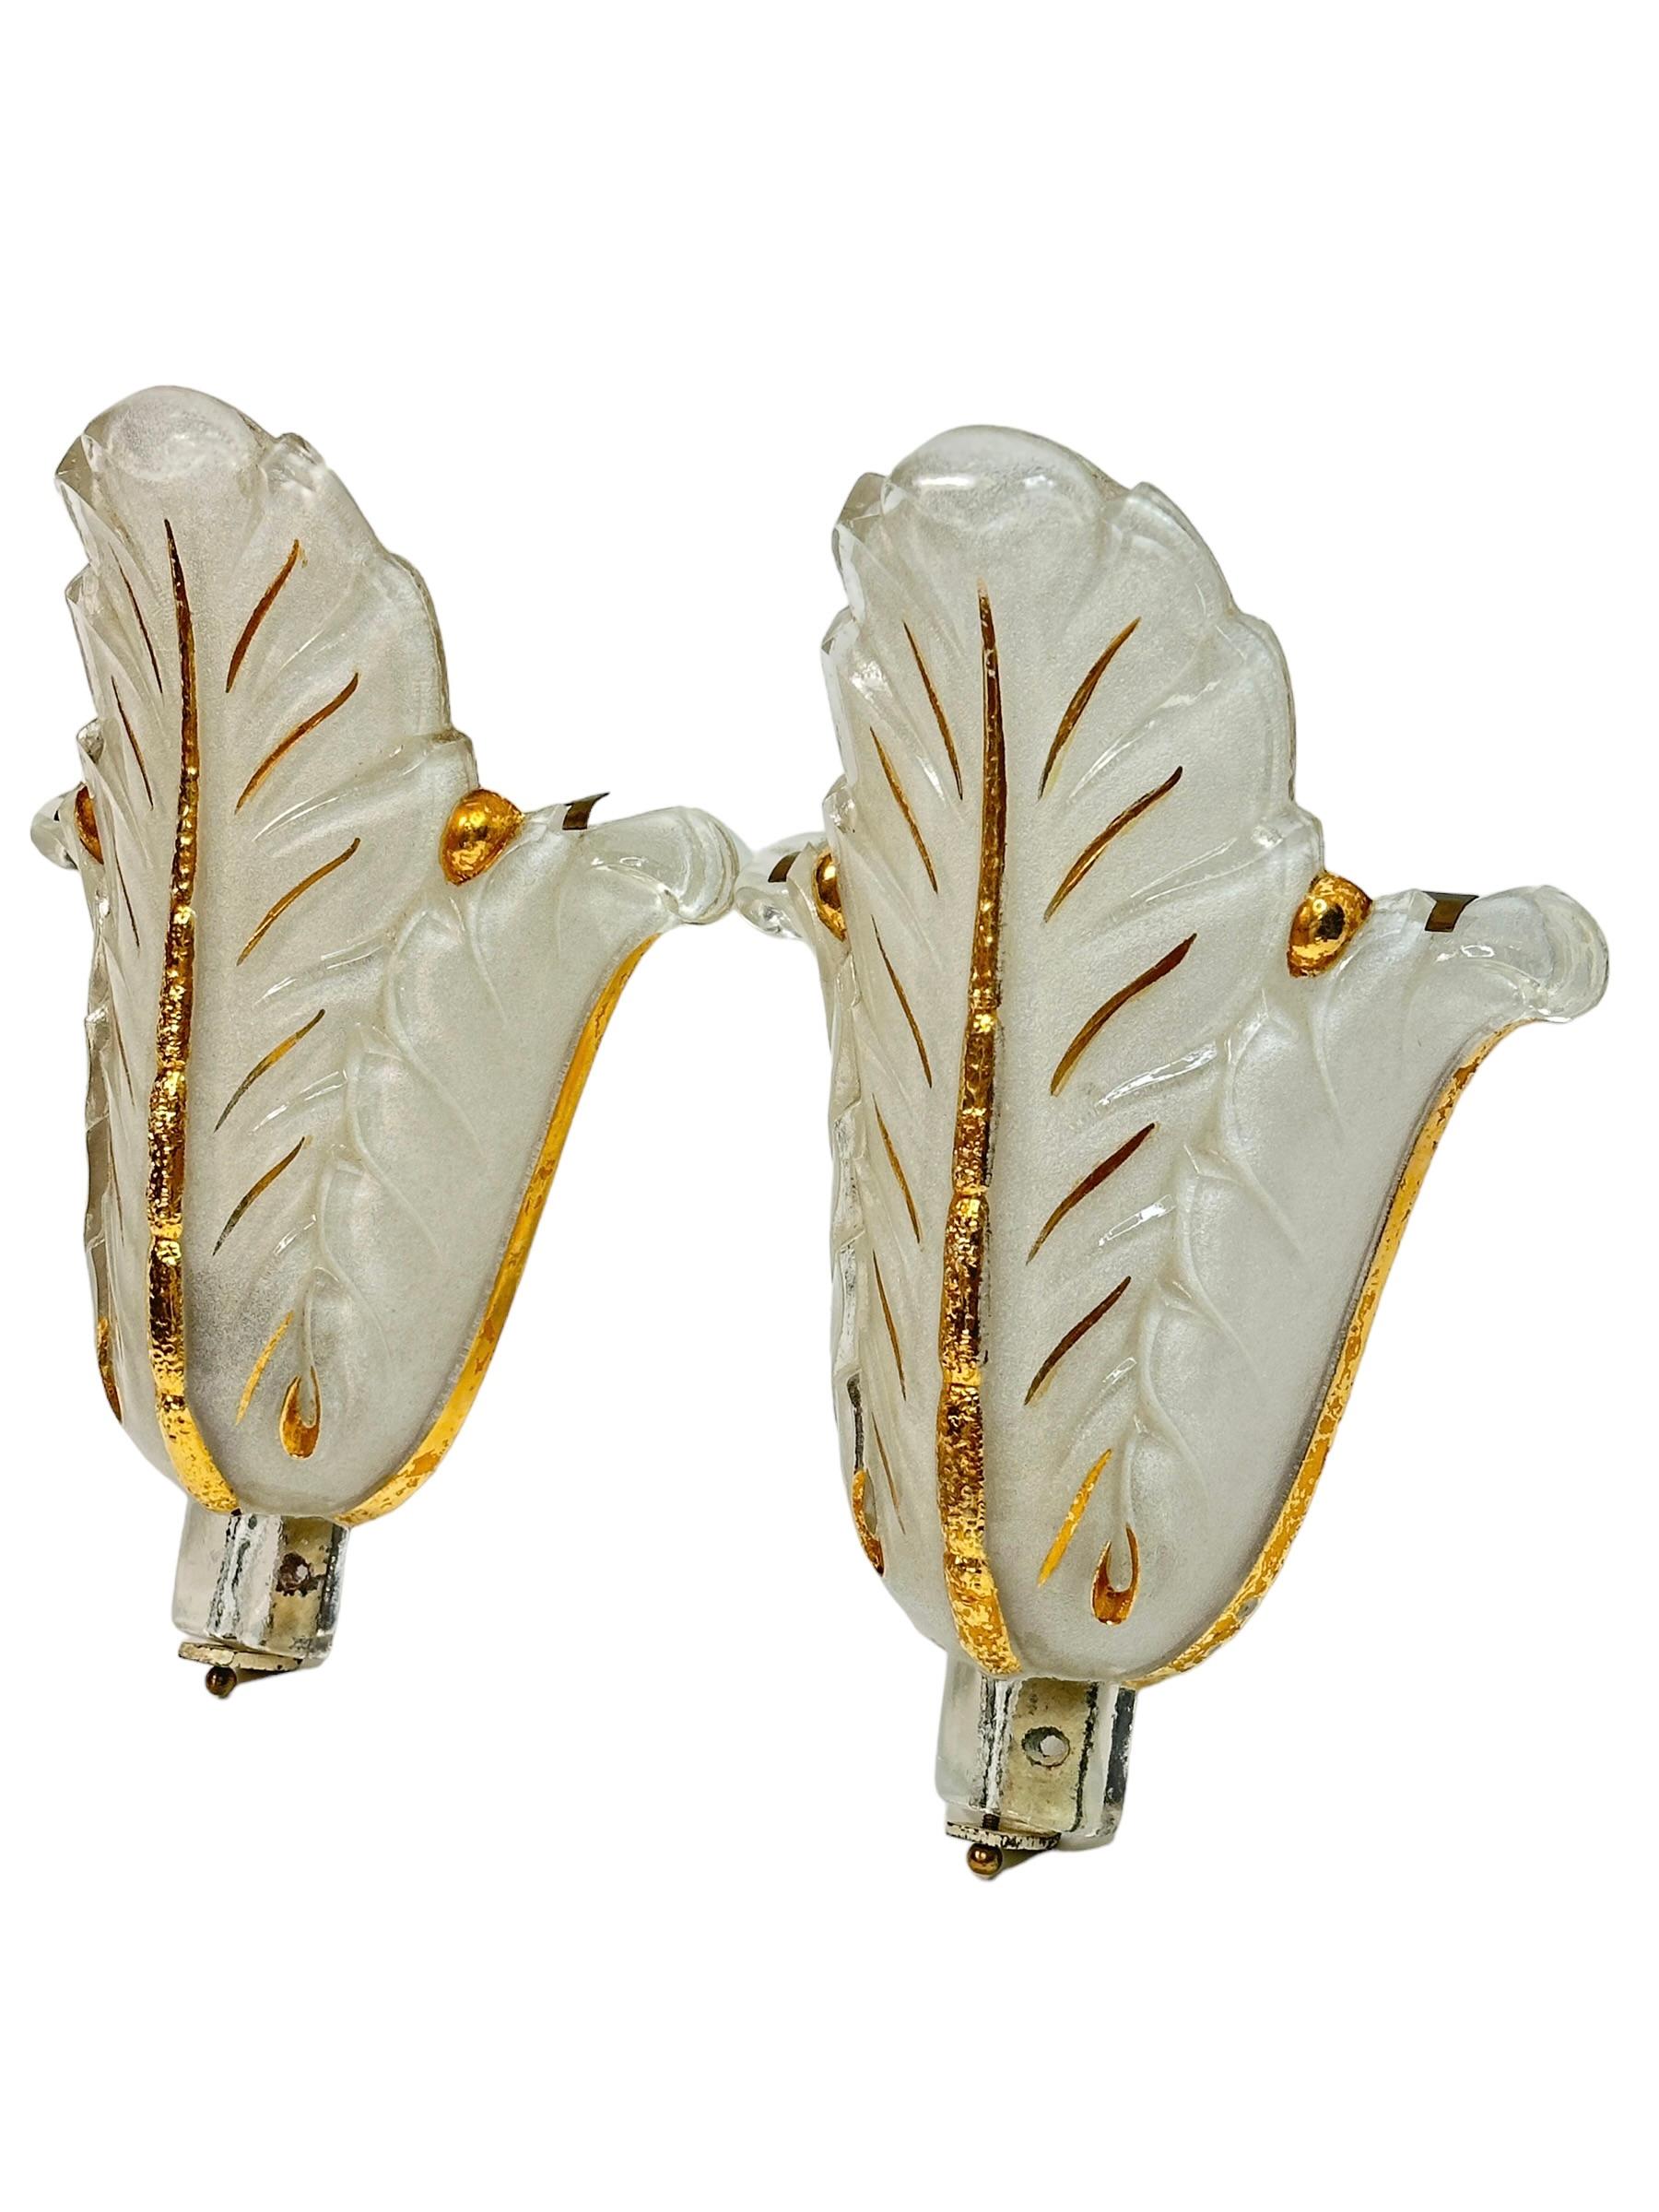 Art Glass Pair of Jean Gauthier Art Deco Glass Sconces 1930s French For Sale